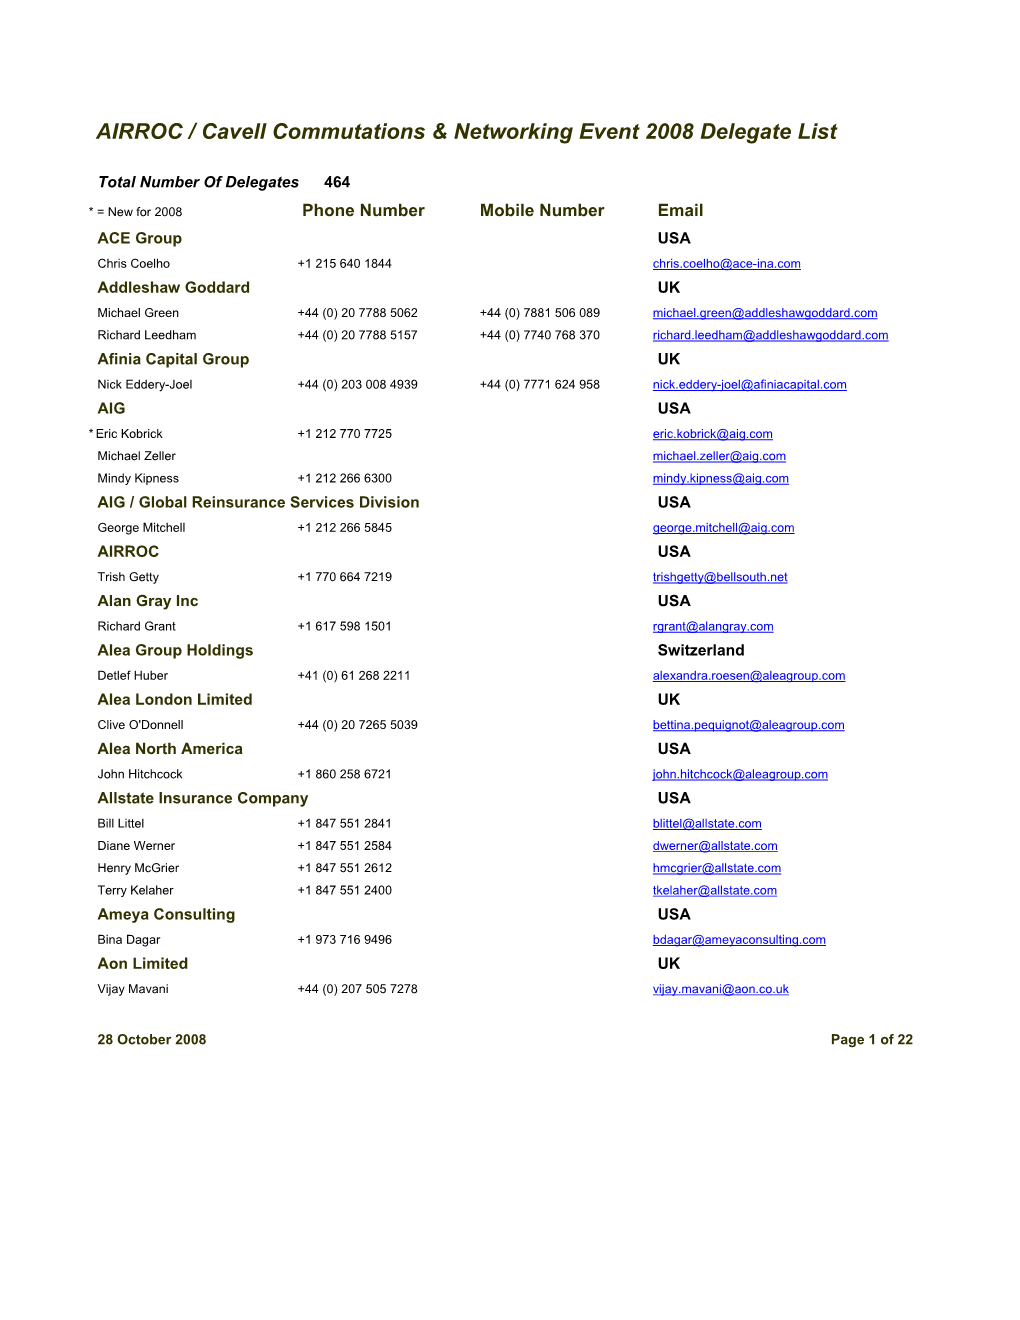 AIRROC / Cavell Commutations & Networking Event 2008 Delegate List